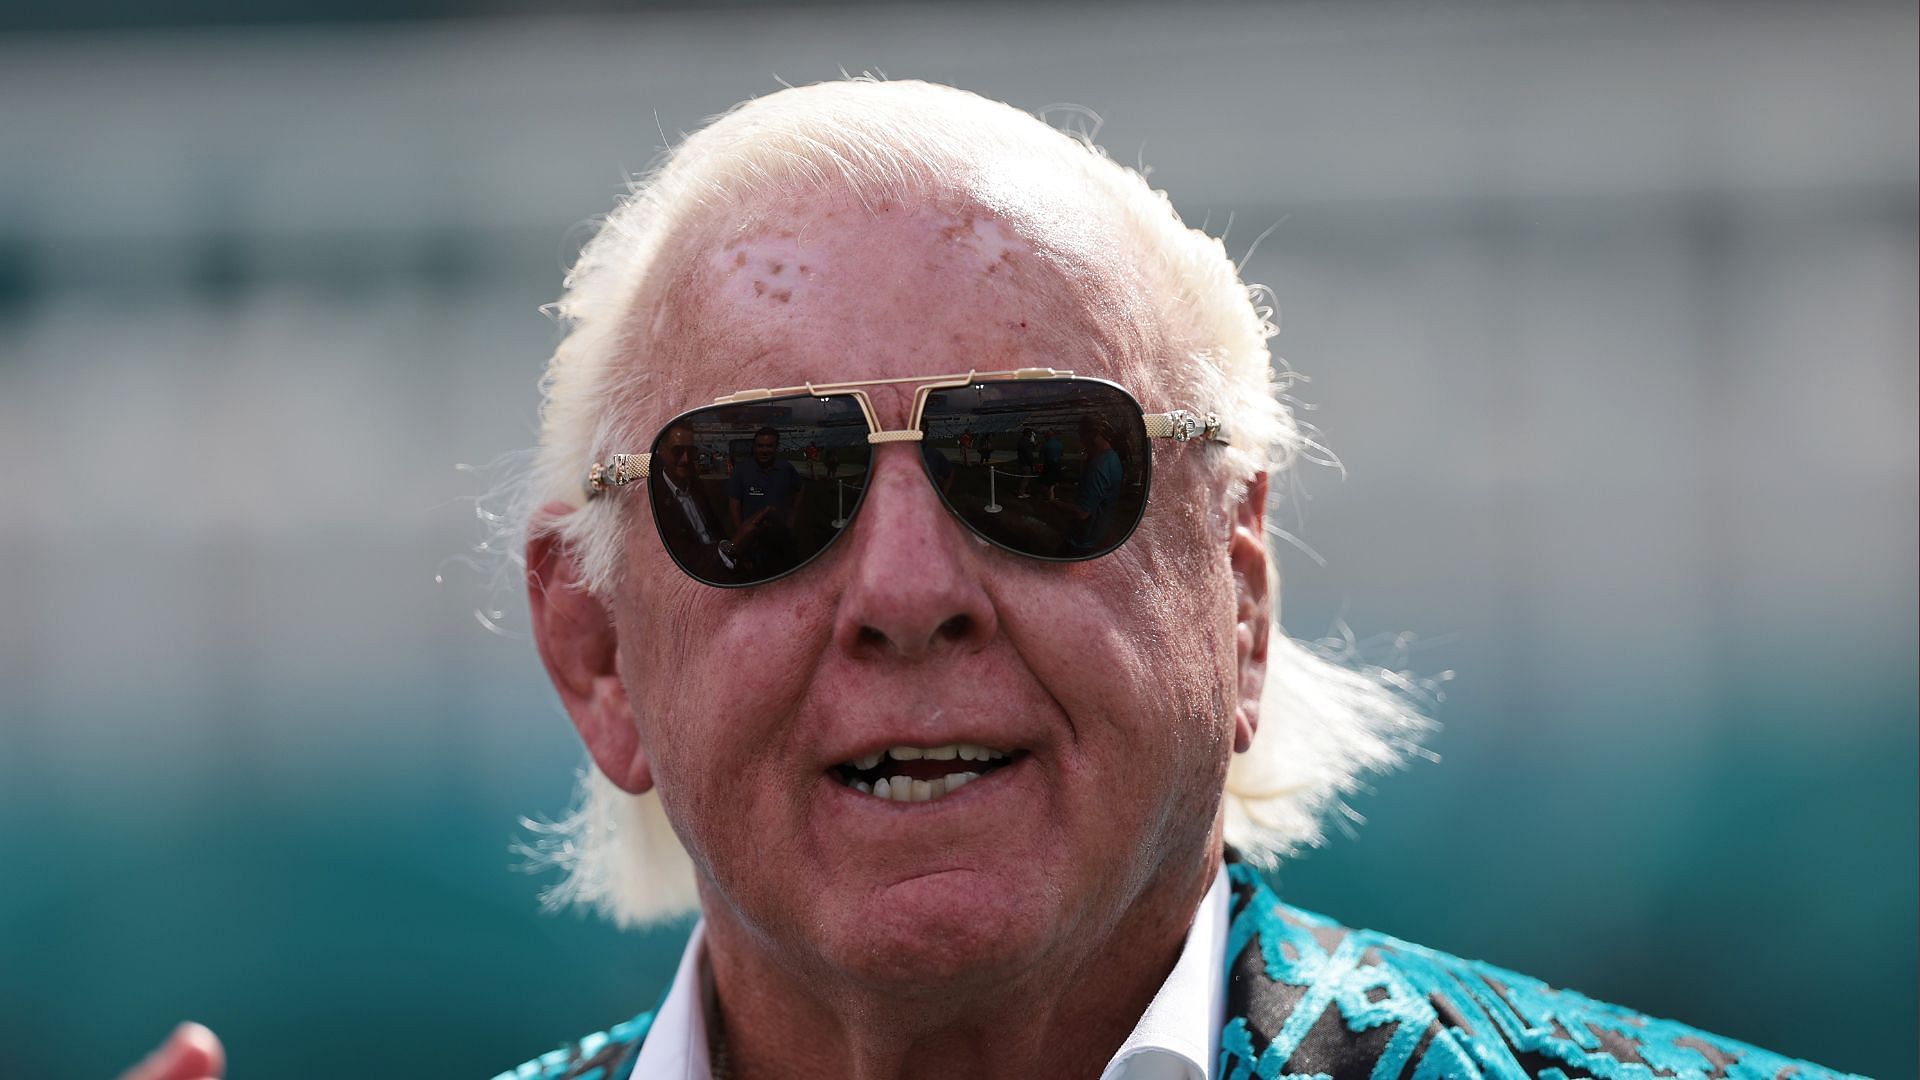 Ric Flair will wrestle his last match this Sunday